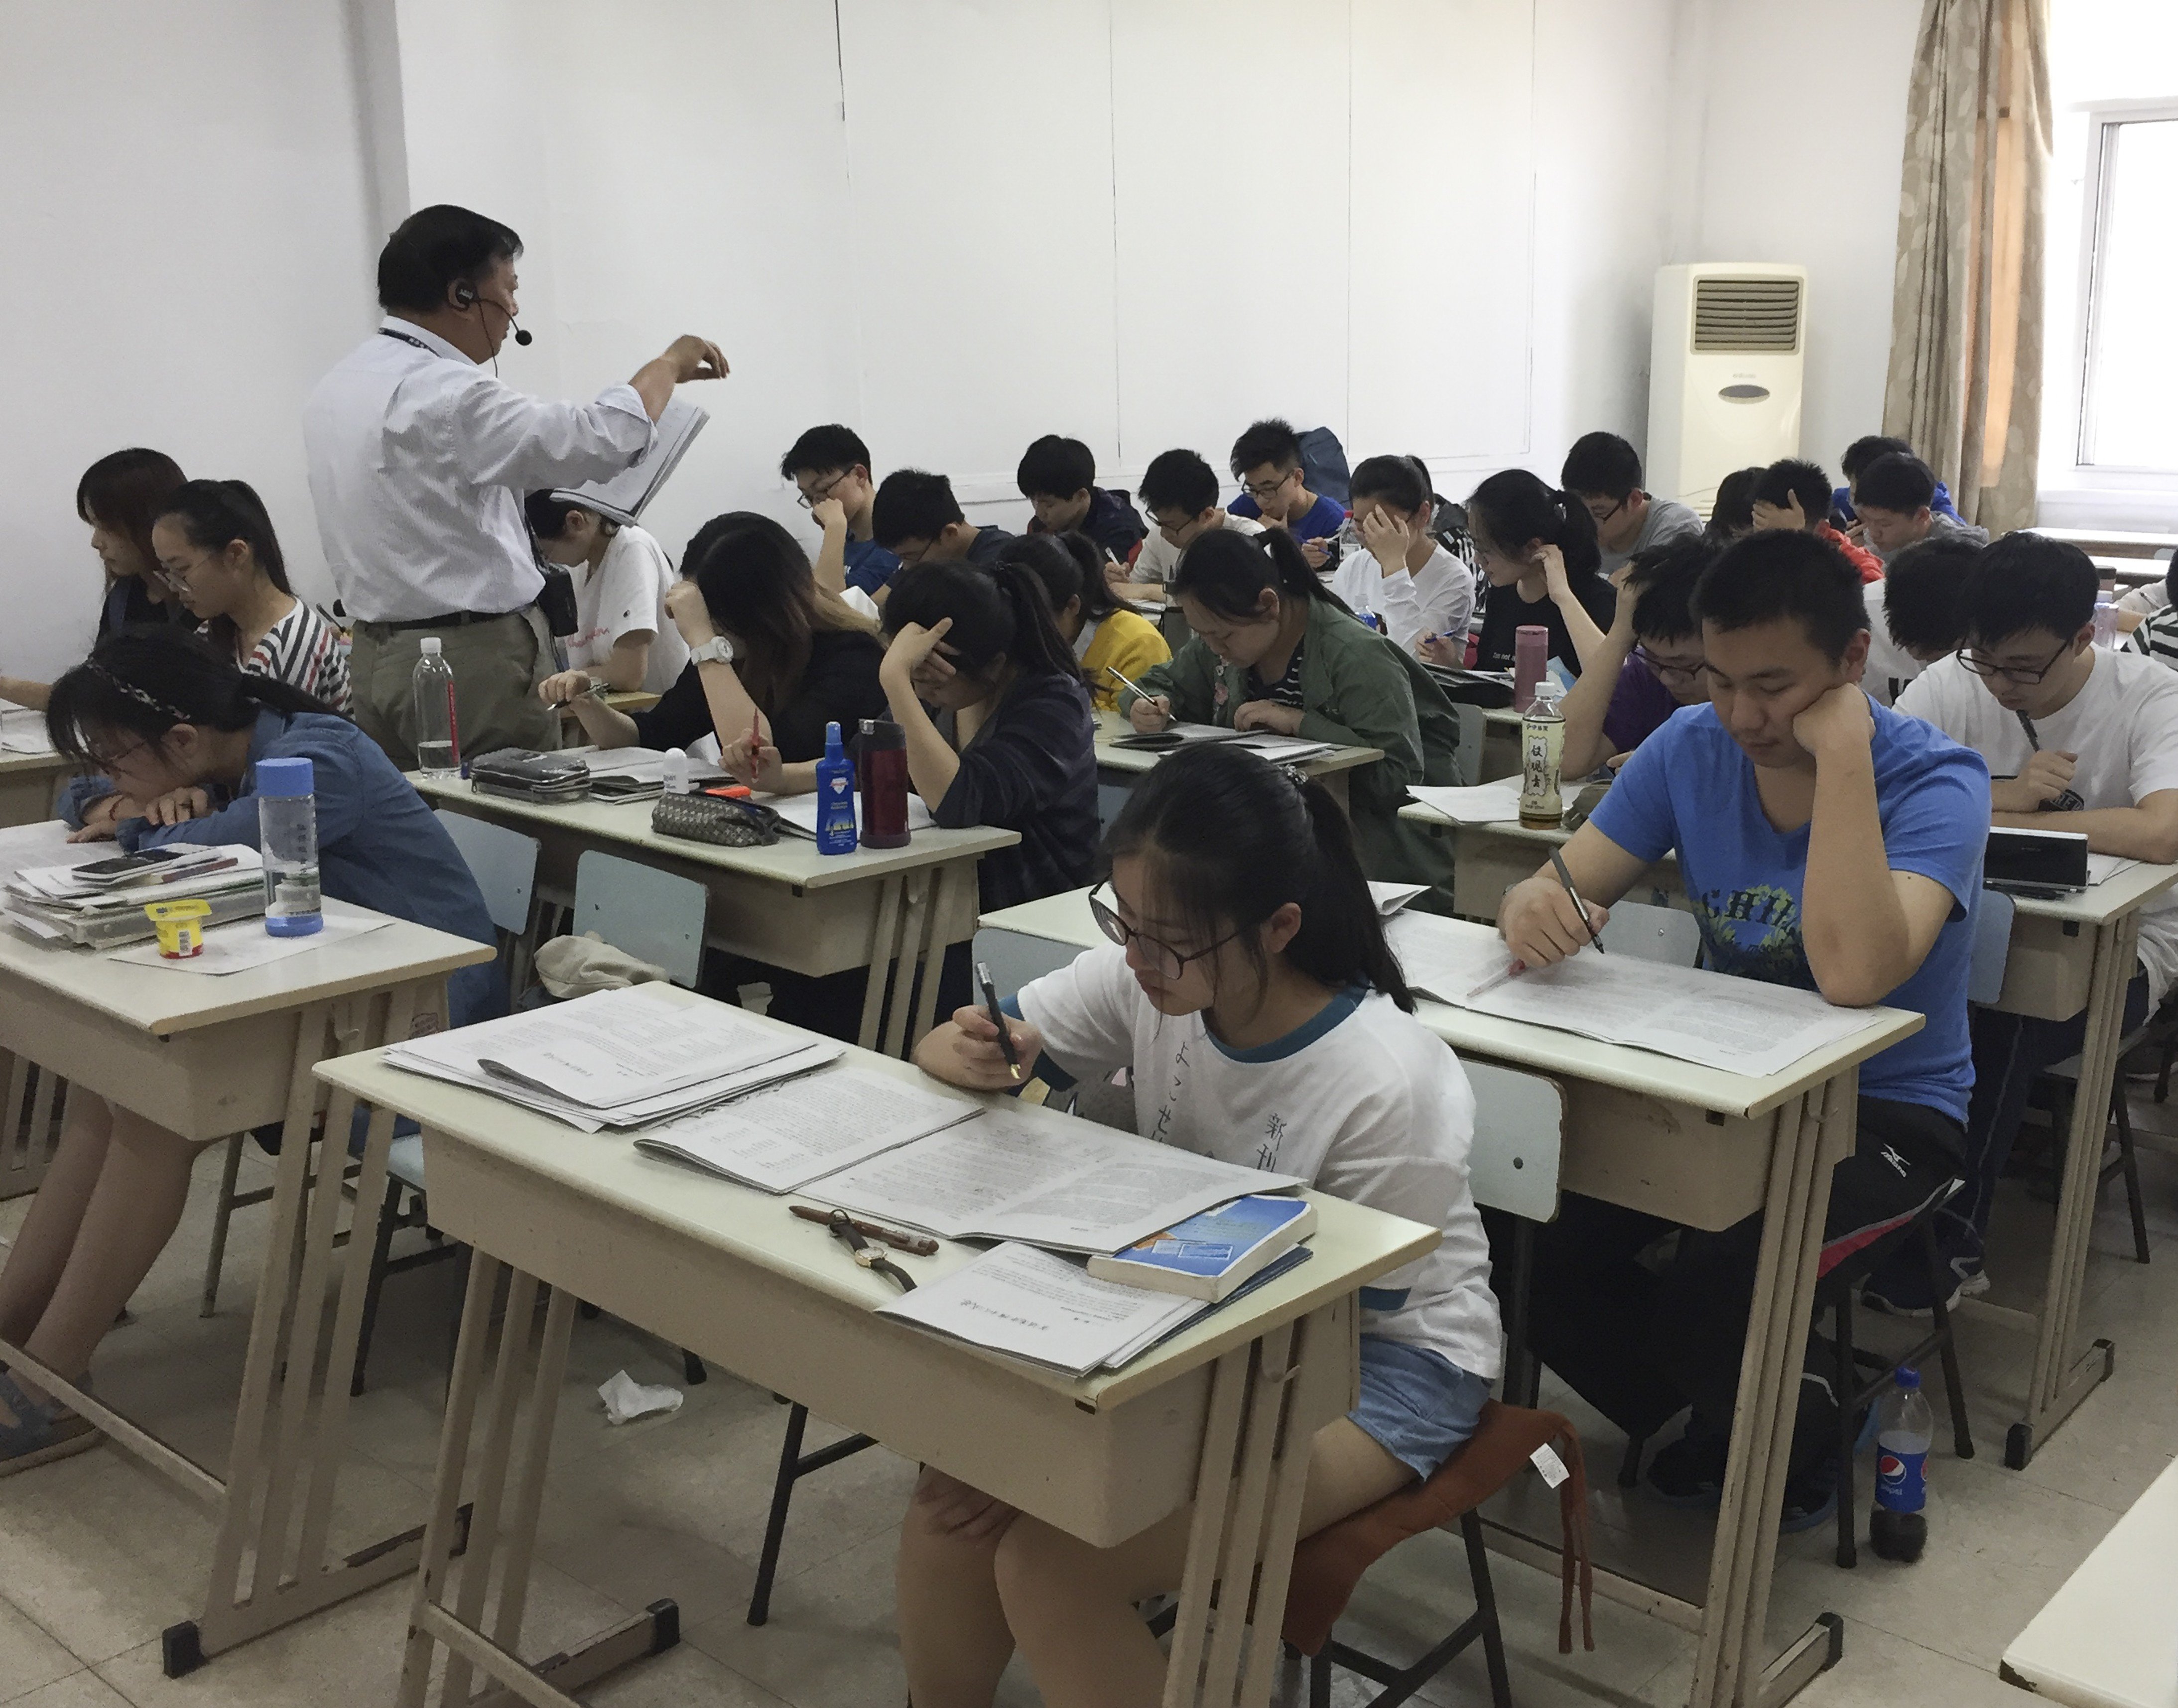 An English teacher at Shanghai Minjin Ziqiang School teaches students who failed in the gaokao, and who need to prepare for the test again. Photo: Handout